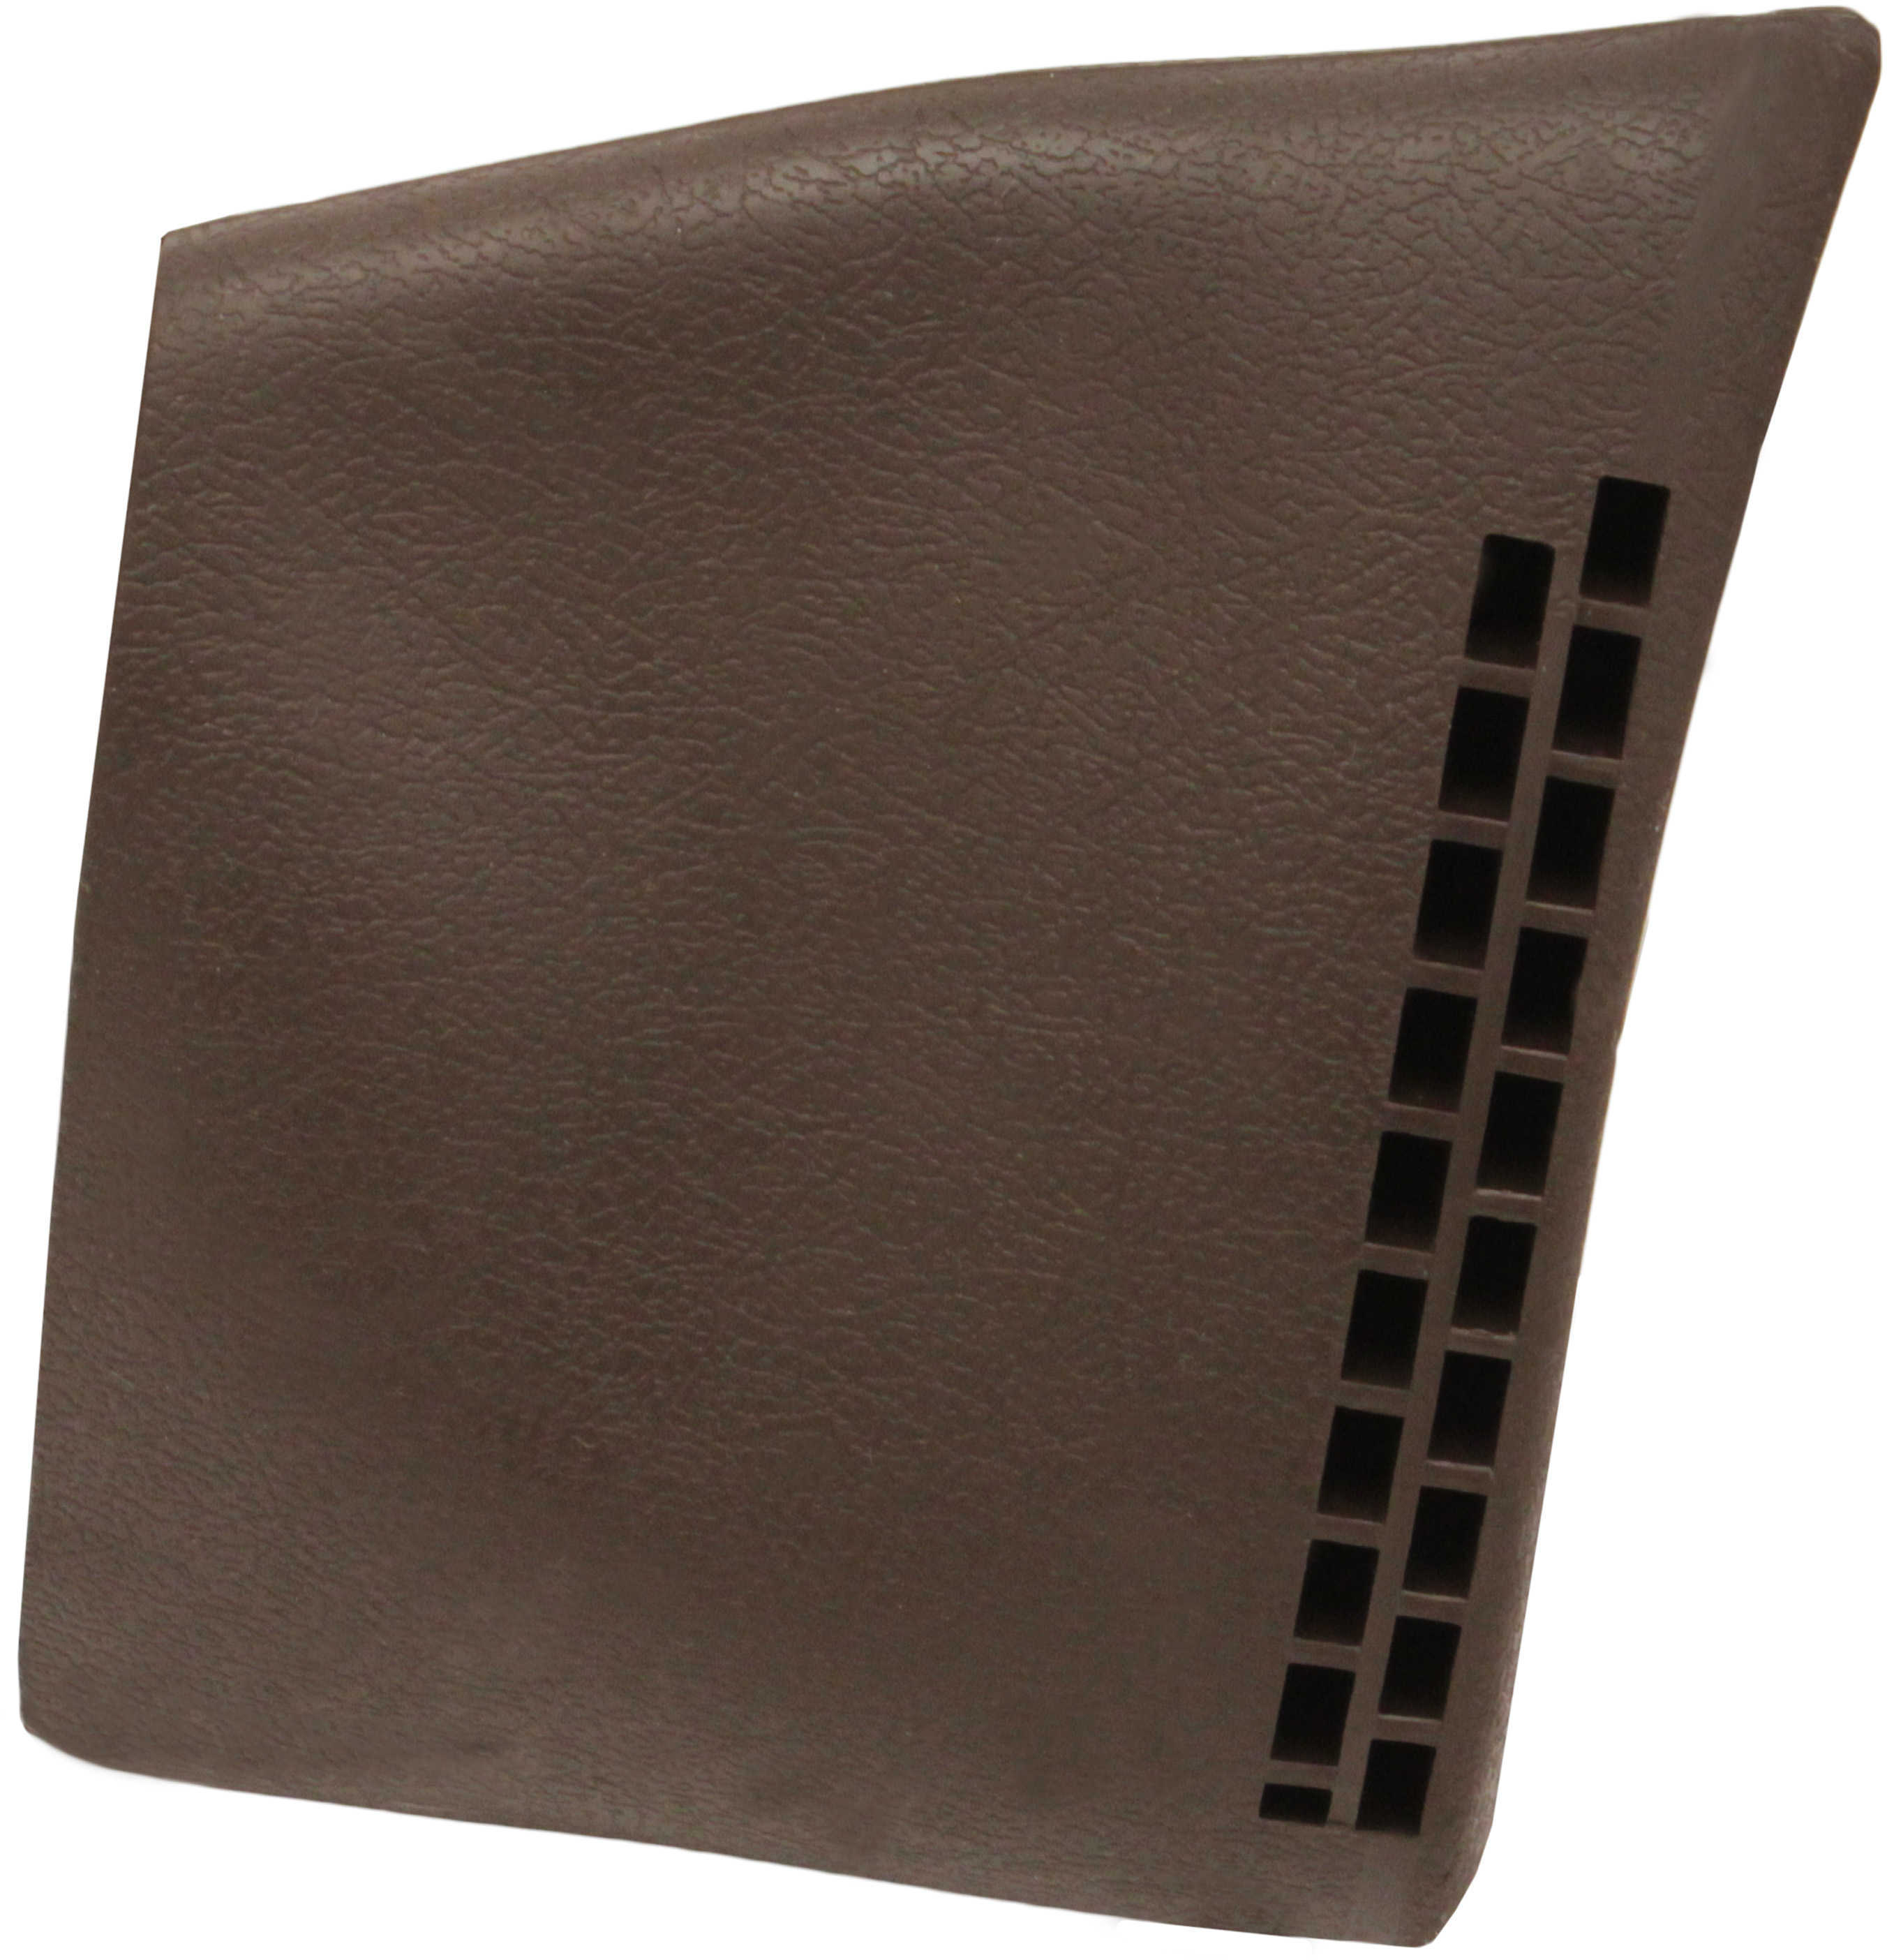 Butler Creek Deluxe Slip-on Recoil Pad - Brown Small 50325